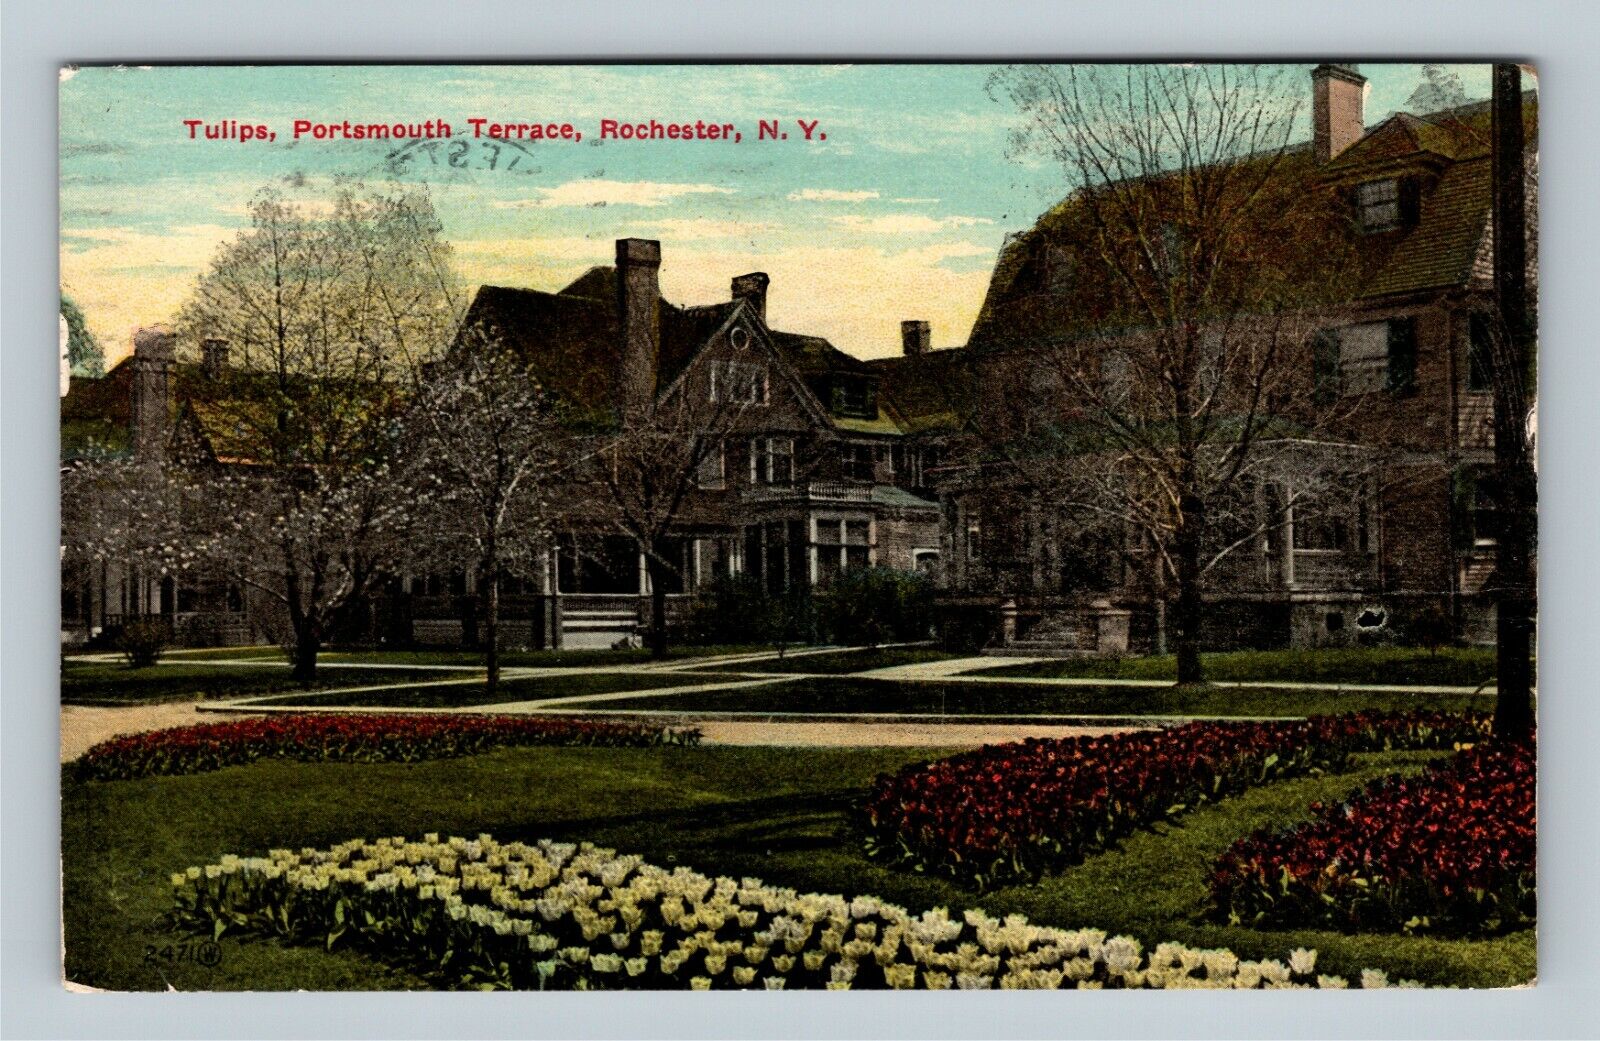 Rochester NY, Tulips, Portsmouth Terrace, Vintage New York c1914 Postcard